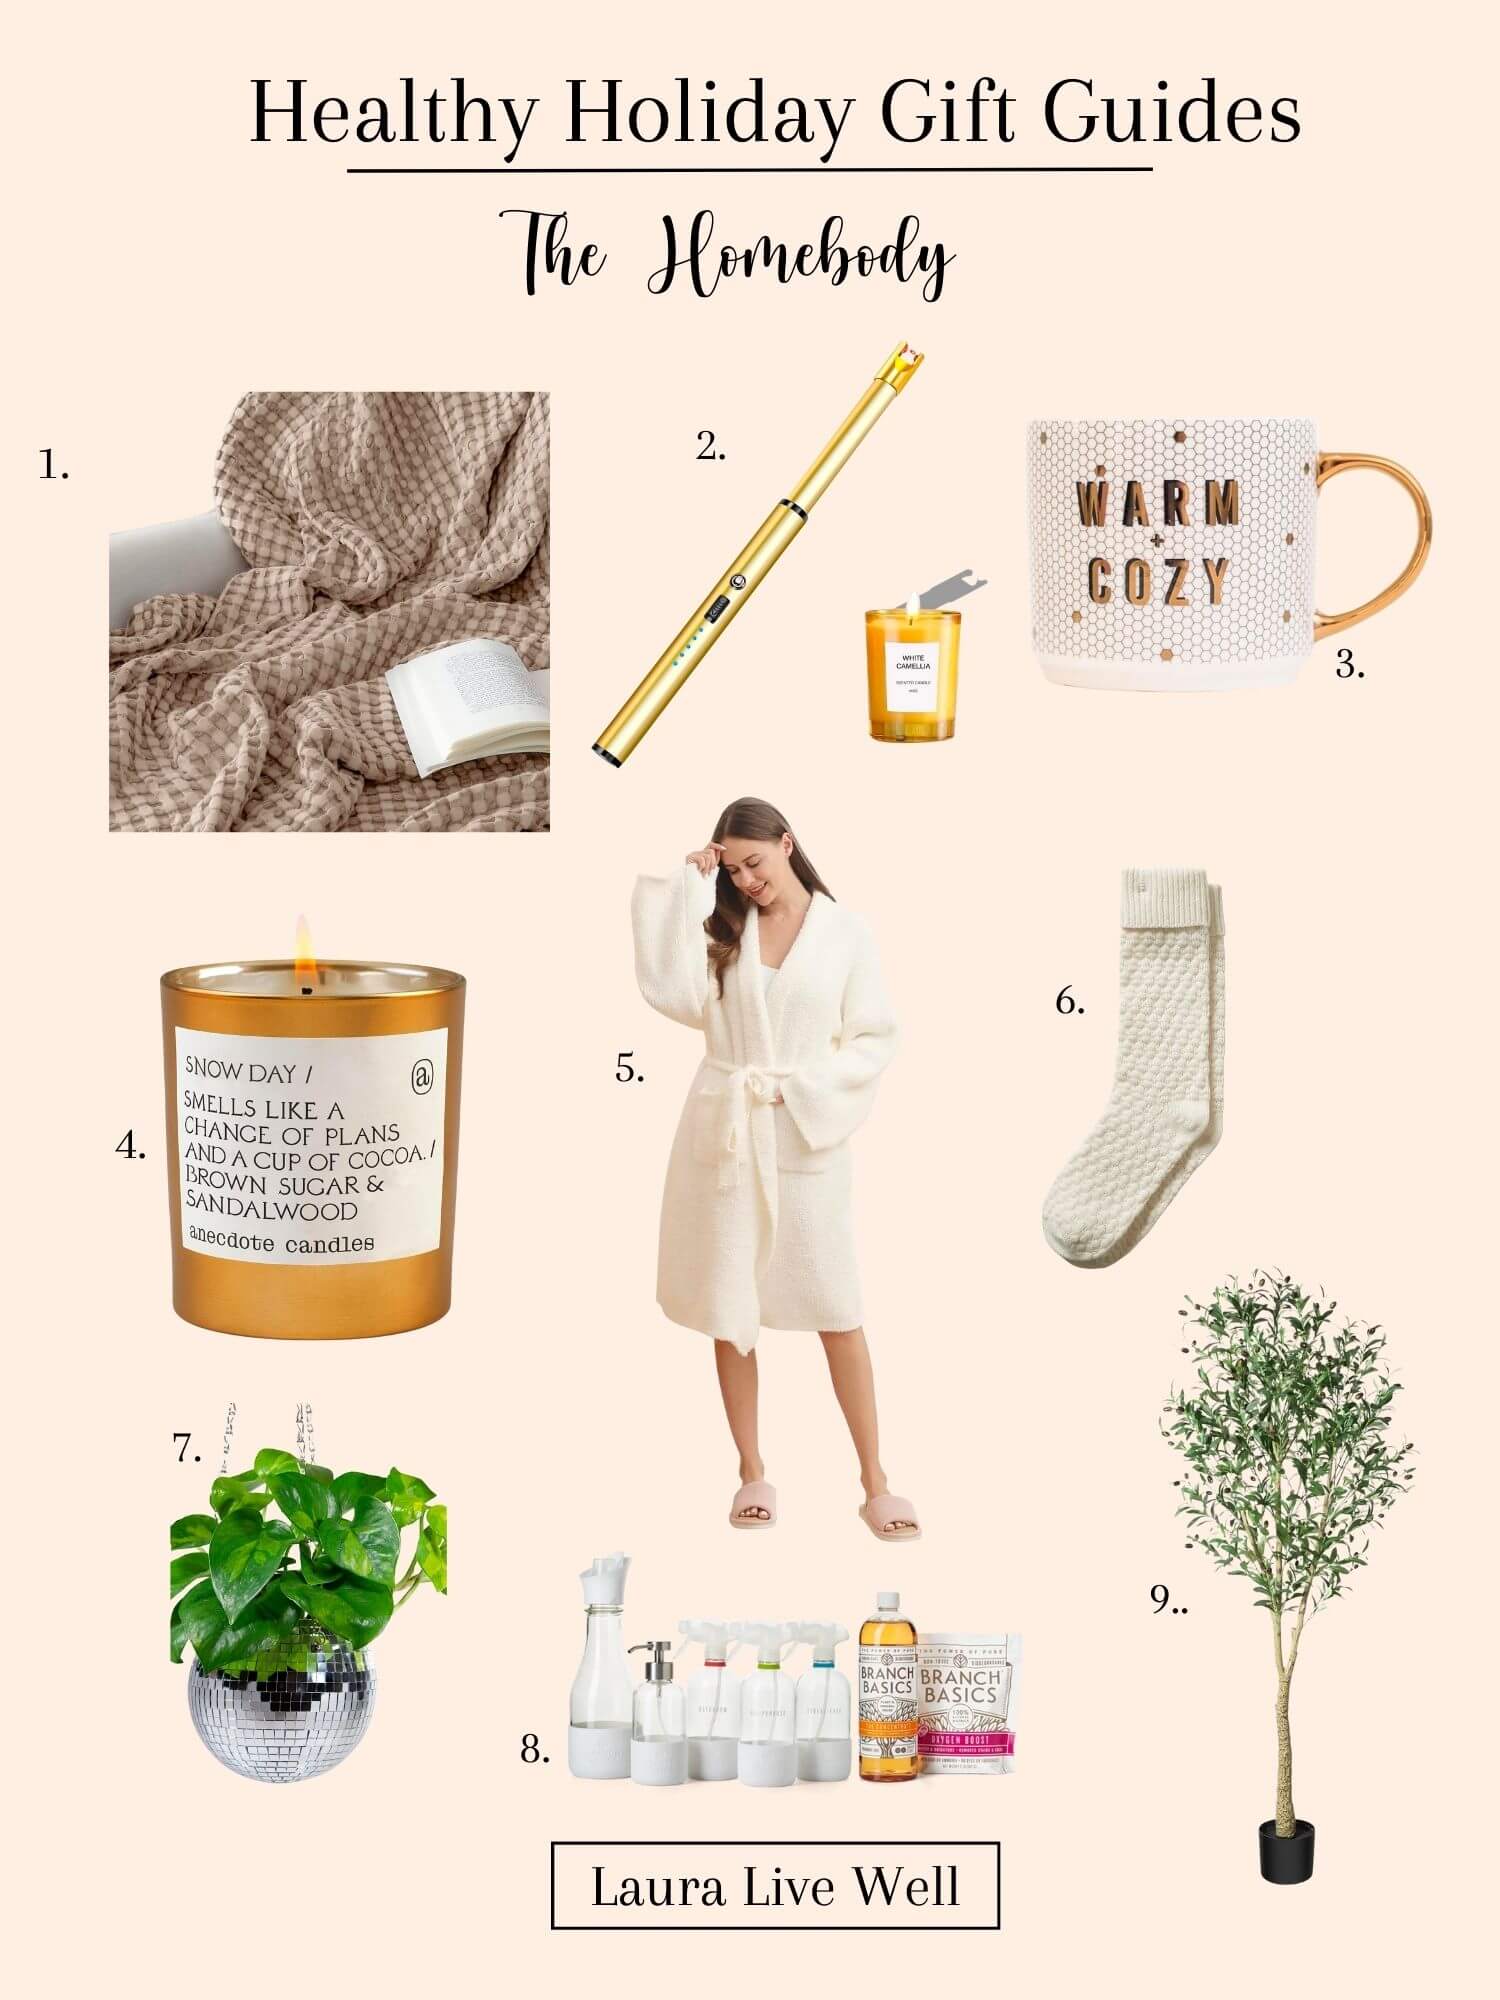 Healthy Holiday Guide: Morning Routine